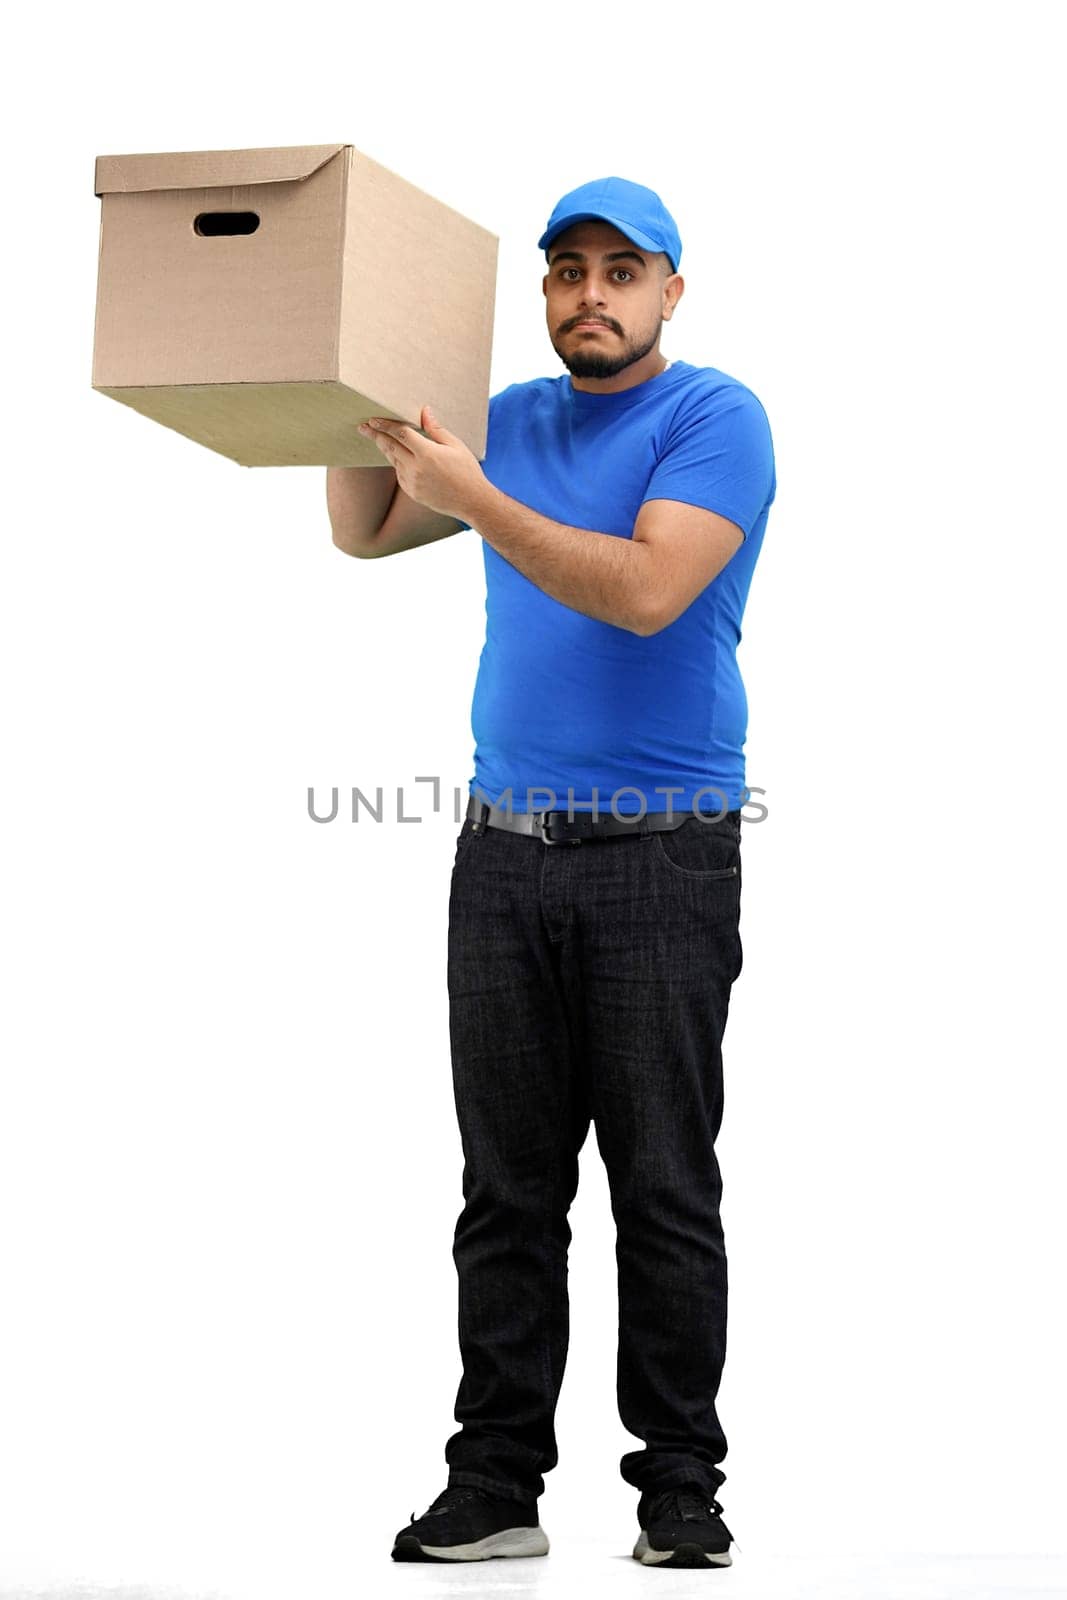 The deliveryman, in full height, on a white background by Prosto